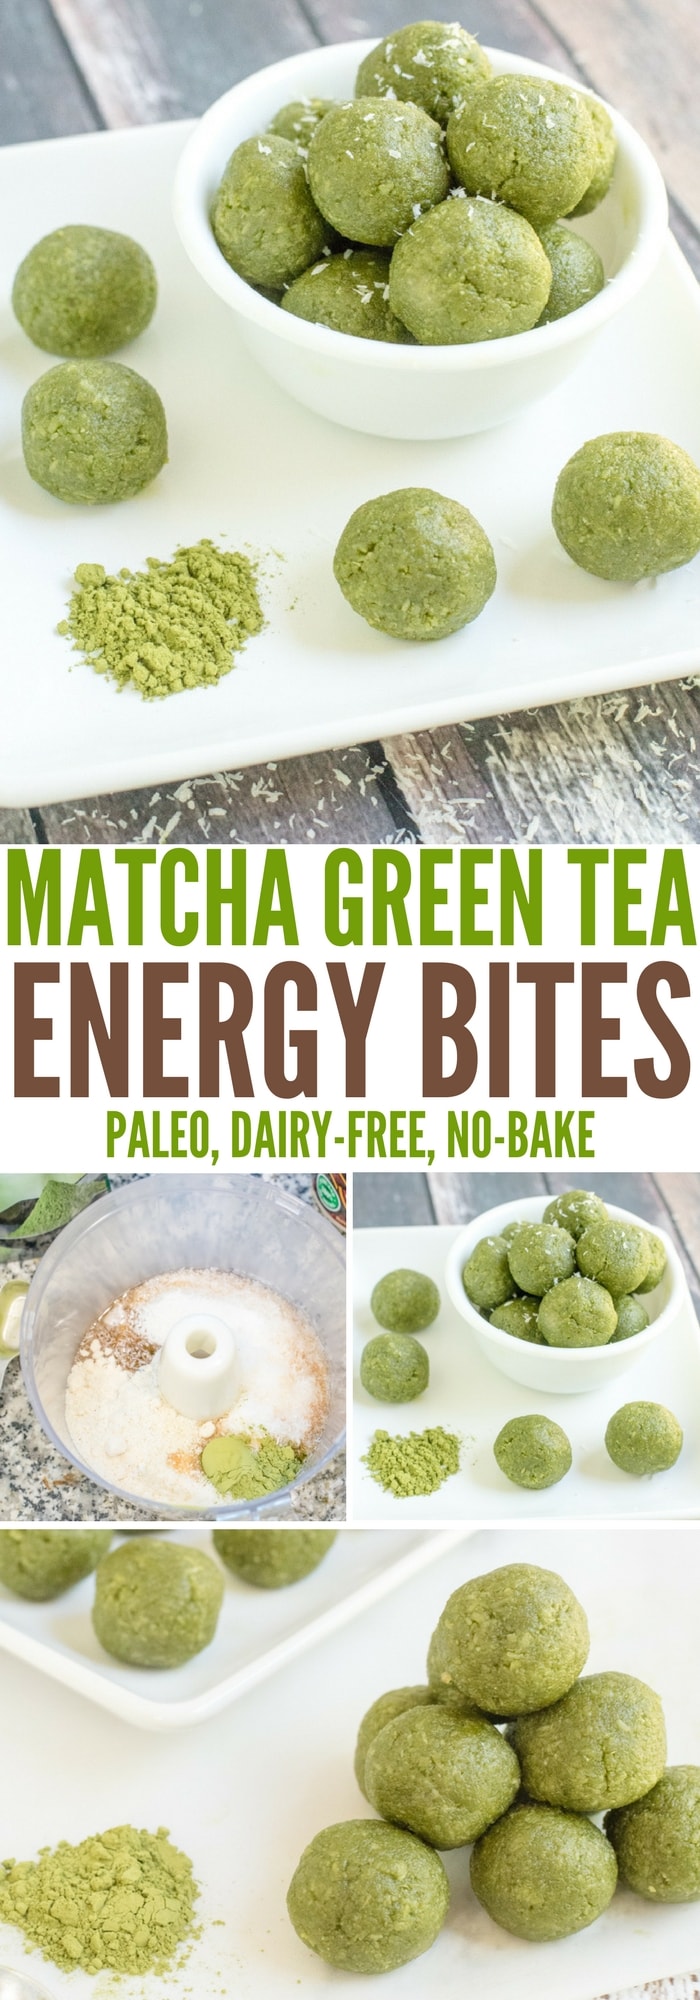 In just 5 minutes, you can whip up a batch of these delicious Matcha Green Tea Energy Bites. This recipe is a perfect healthy pick-me-up for any time of the day. (Gluten-free, dairy-free, grain-free, and Paleo-friendly)